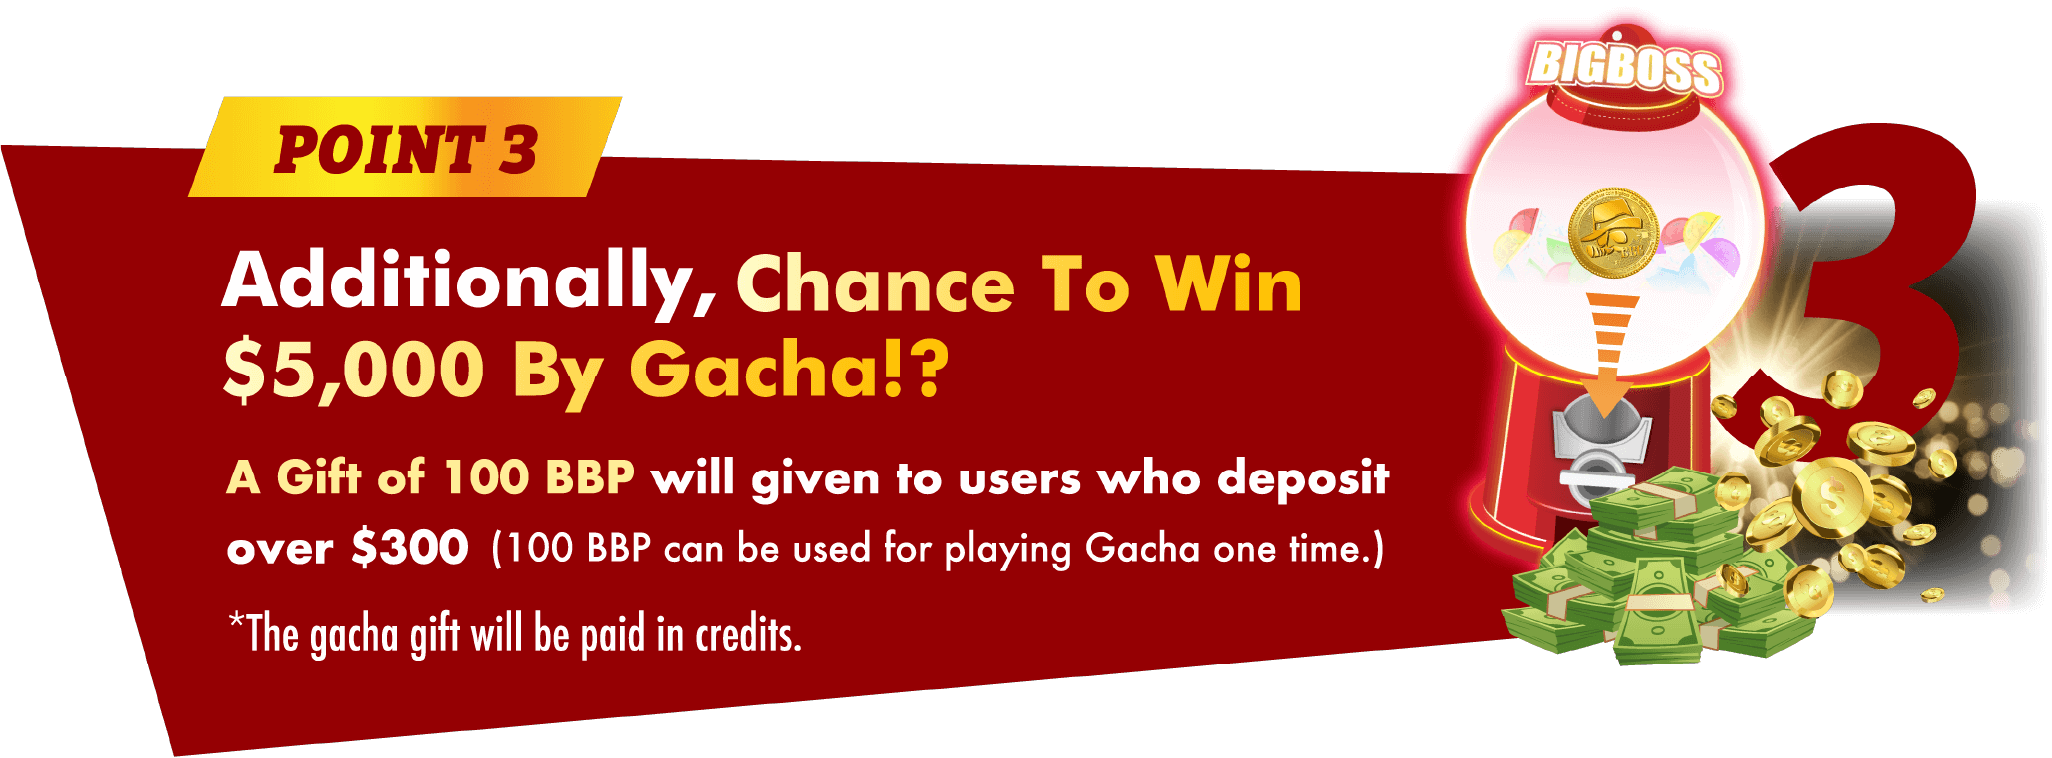 Additionally,Chance To Win $5,000 By Gacha!?